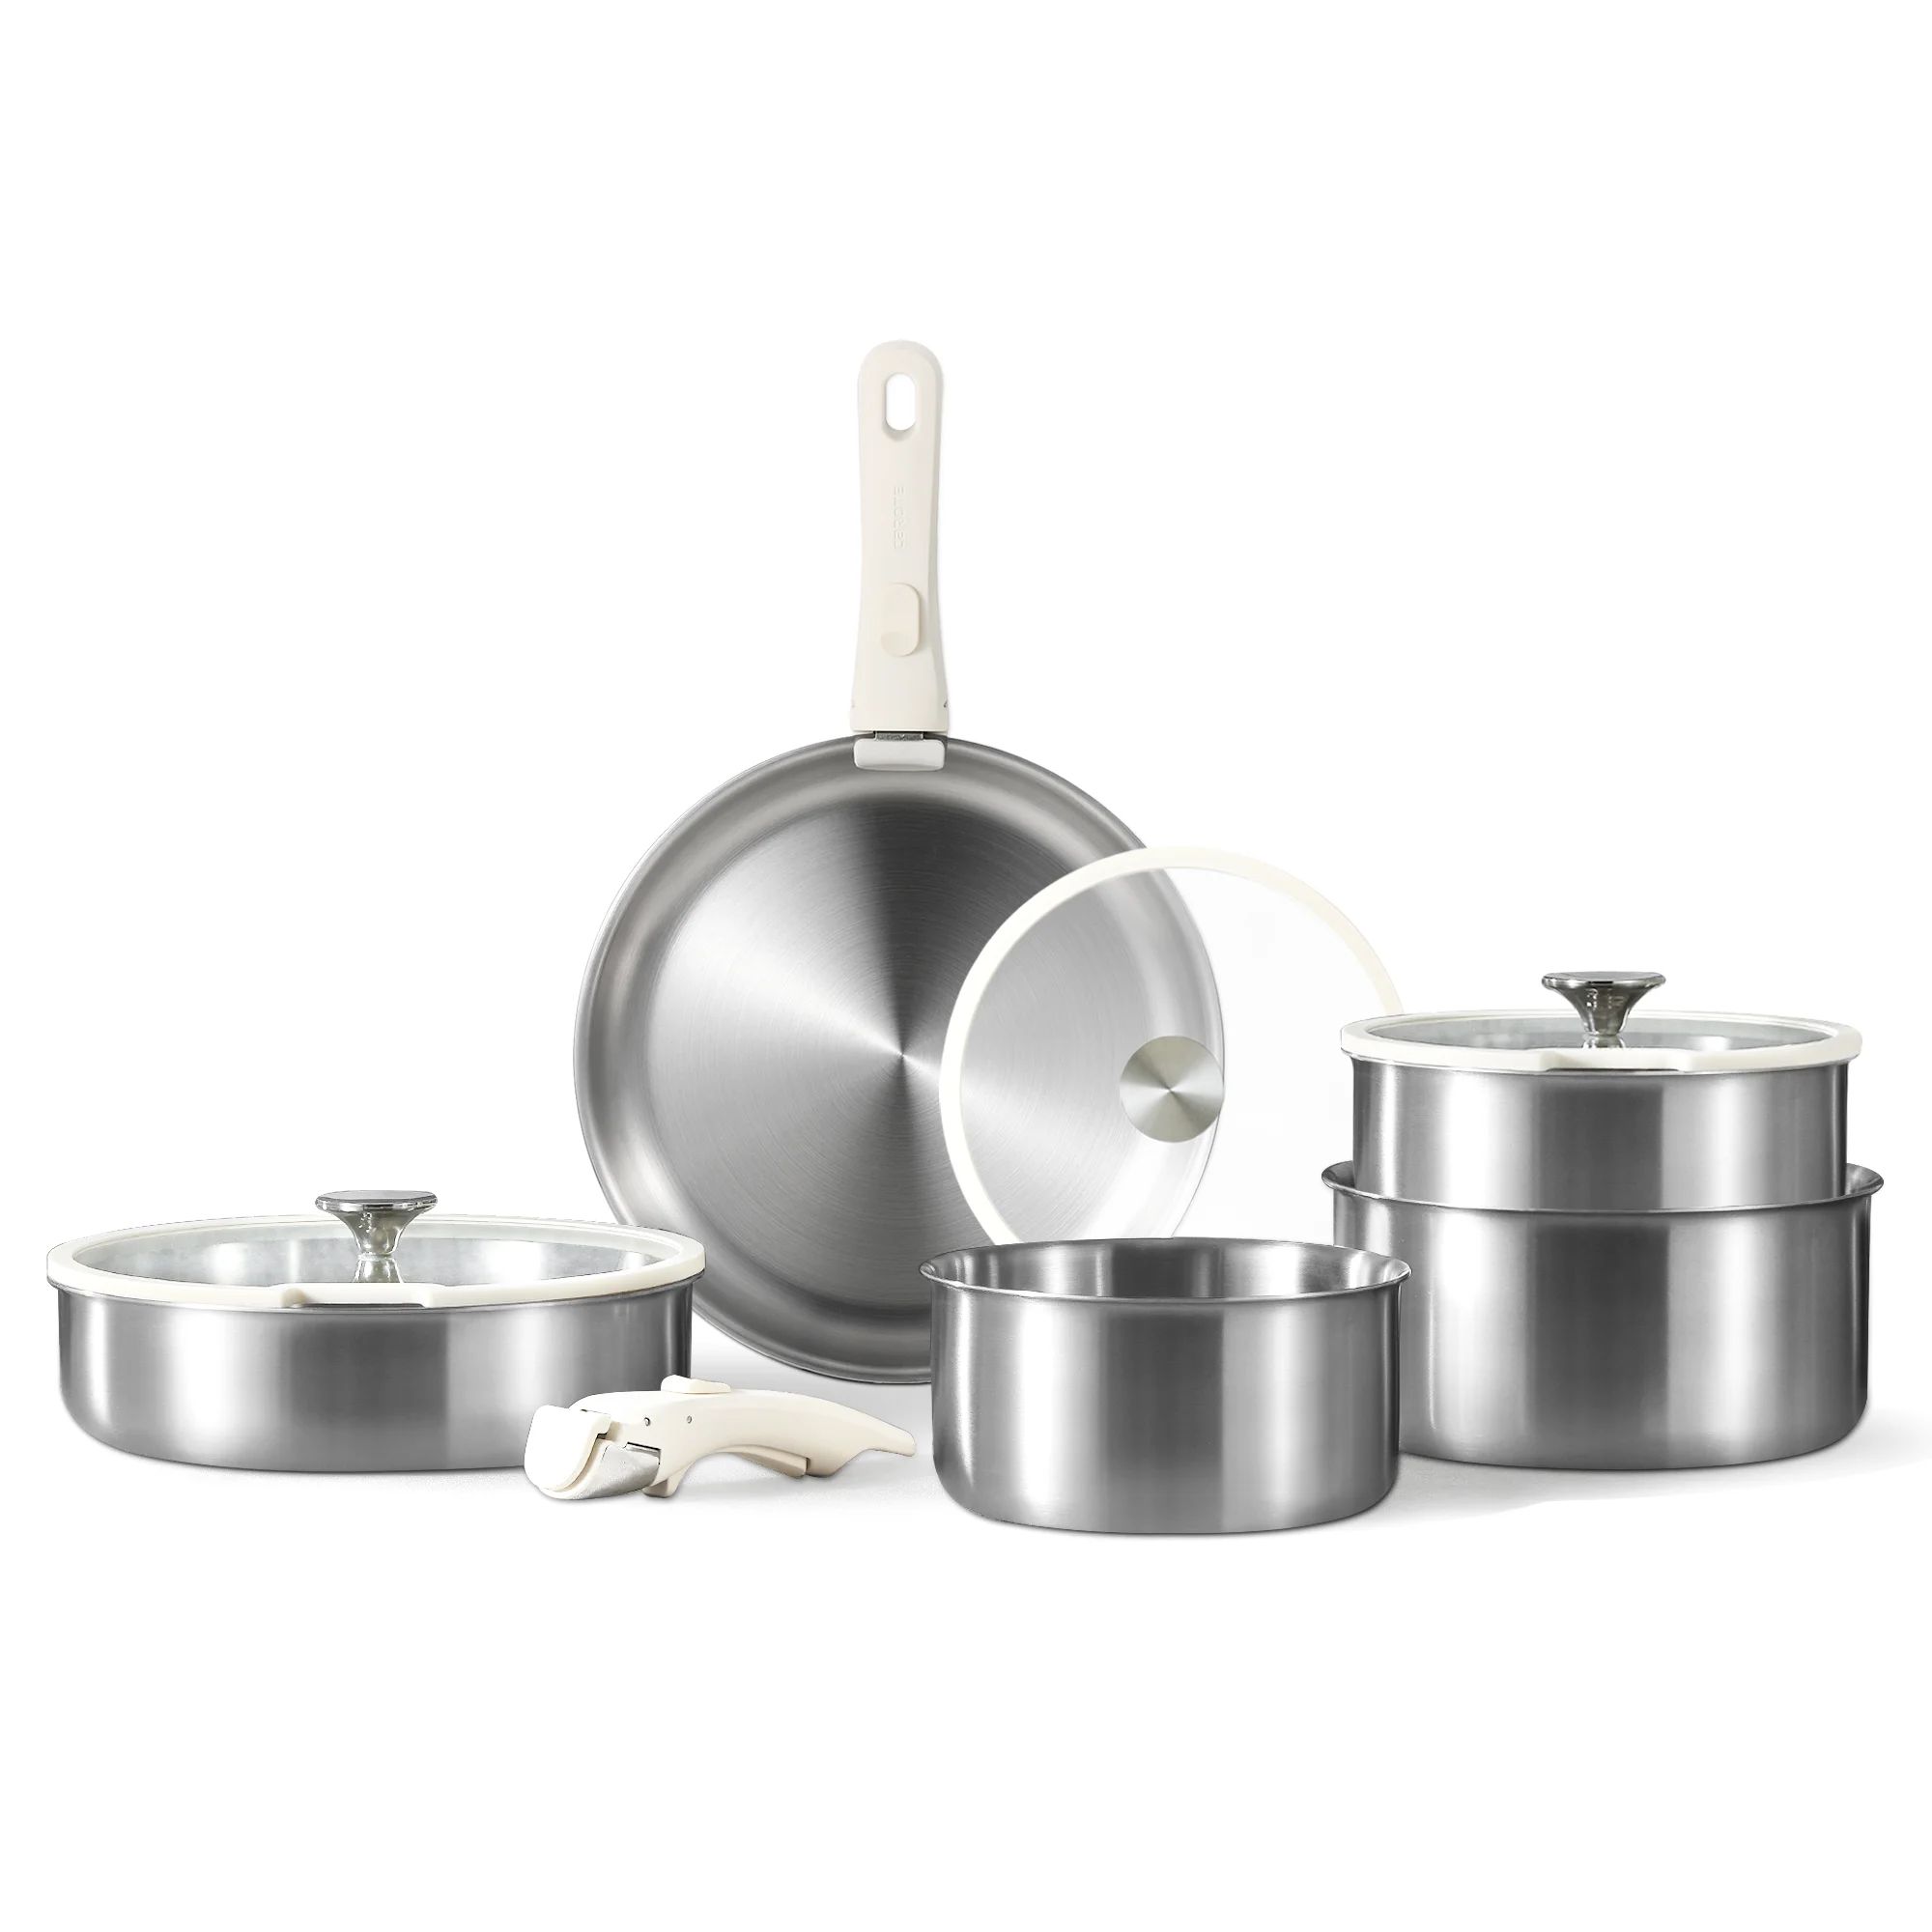 CAROTE Stainless Steel Pots and Pans Set, Cookware Set with Detachable Handle, Induction Kitchen ... | Walmart (US)